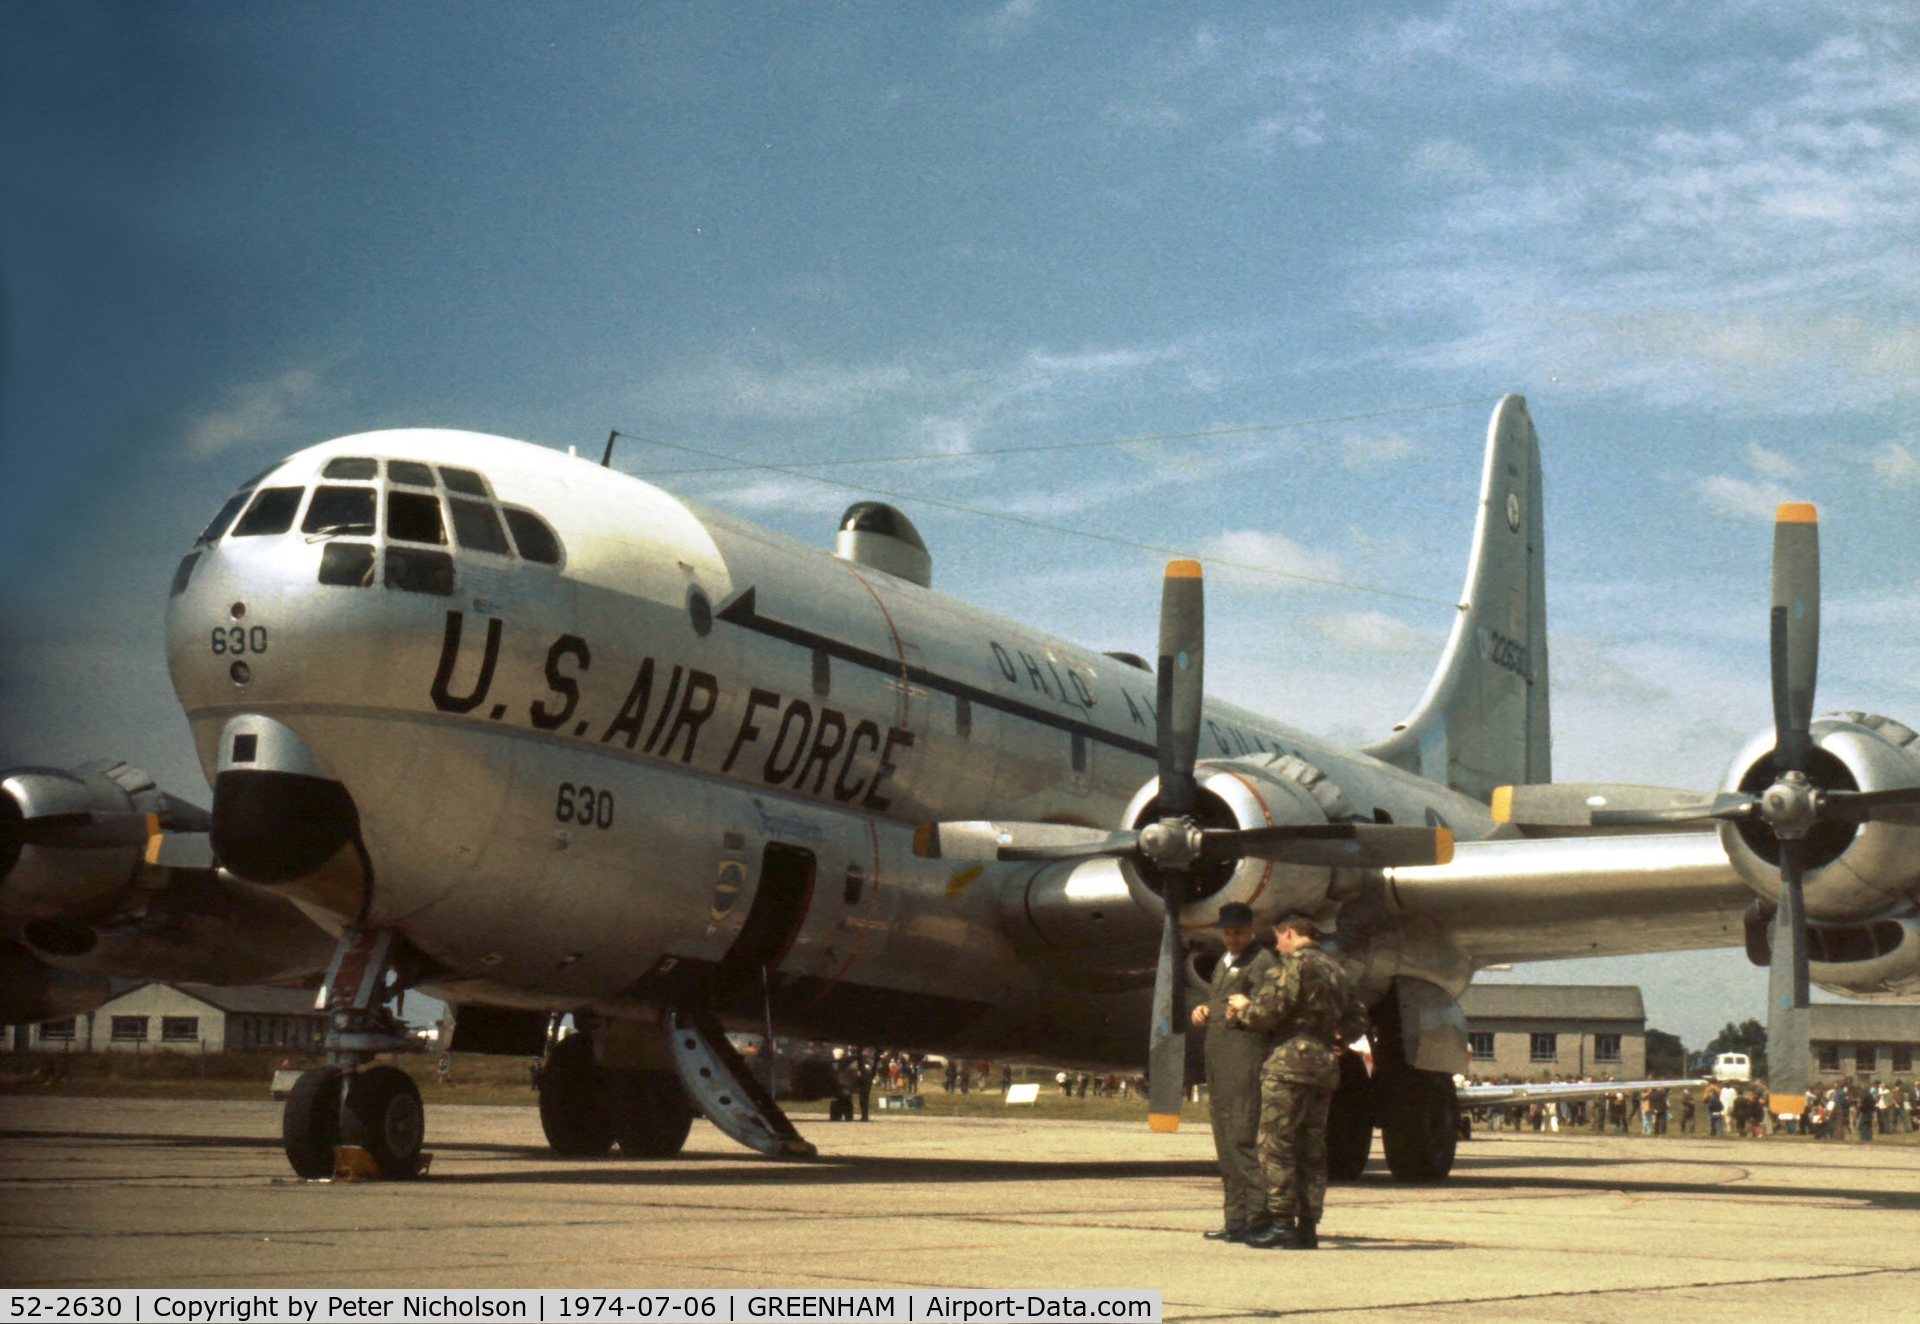 52-2630, 1952 Boeing KC-97L Stratofreighter C/N 16661, Another view of the 145th Air Refuelling Squadron/160th Air Refuelling Wing's KC-97L at the 1974 Intnl Air Tattoo at RAF Greenham Common.